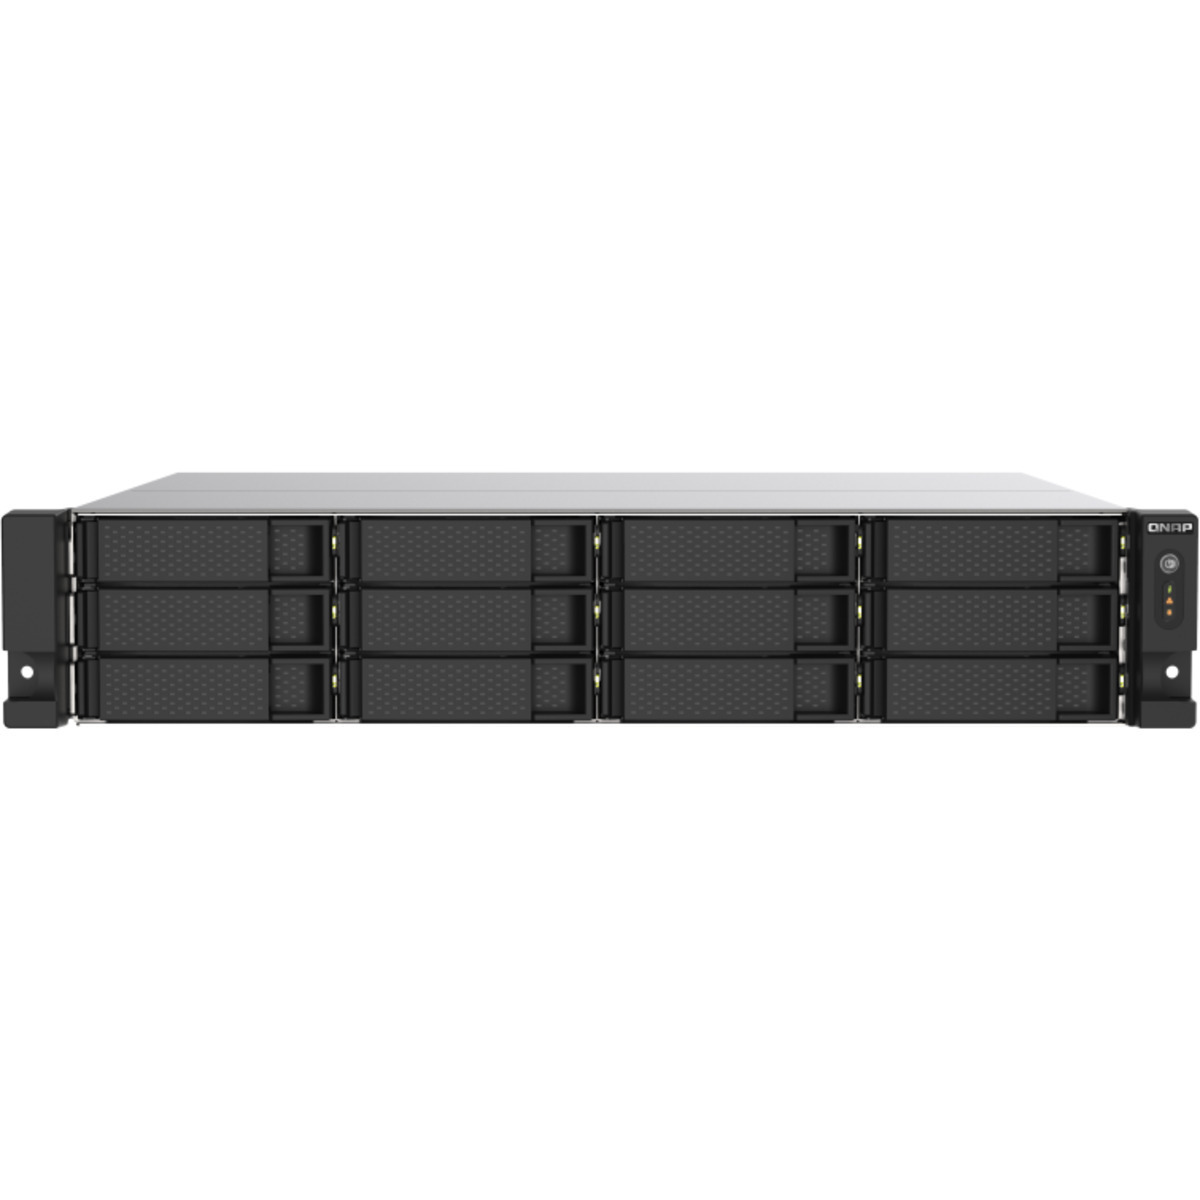 QNAP TS-1273AU-RP 36tb 12-Bay RackMount Multimedia / Power User / Business NAS - Network Attached Storage Device 9x4tb Western Digital Gold WD4004FRYZ 3.5 7200rpm SATA 6Gb/s HDD ENTERPRISE Class Drives Installed - Burn-In Tested - FREE RAM UPGRADE TS-1273AU-RP